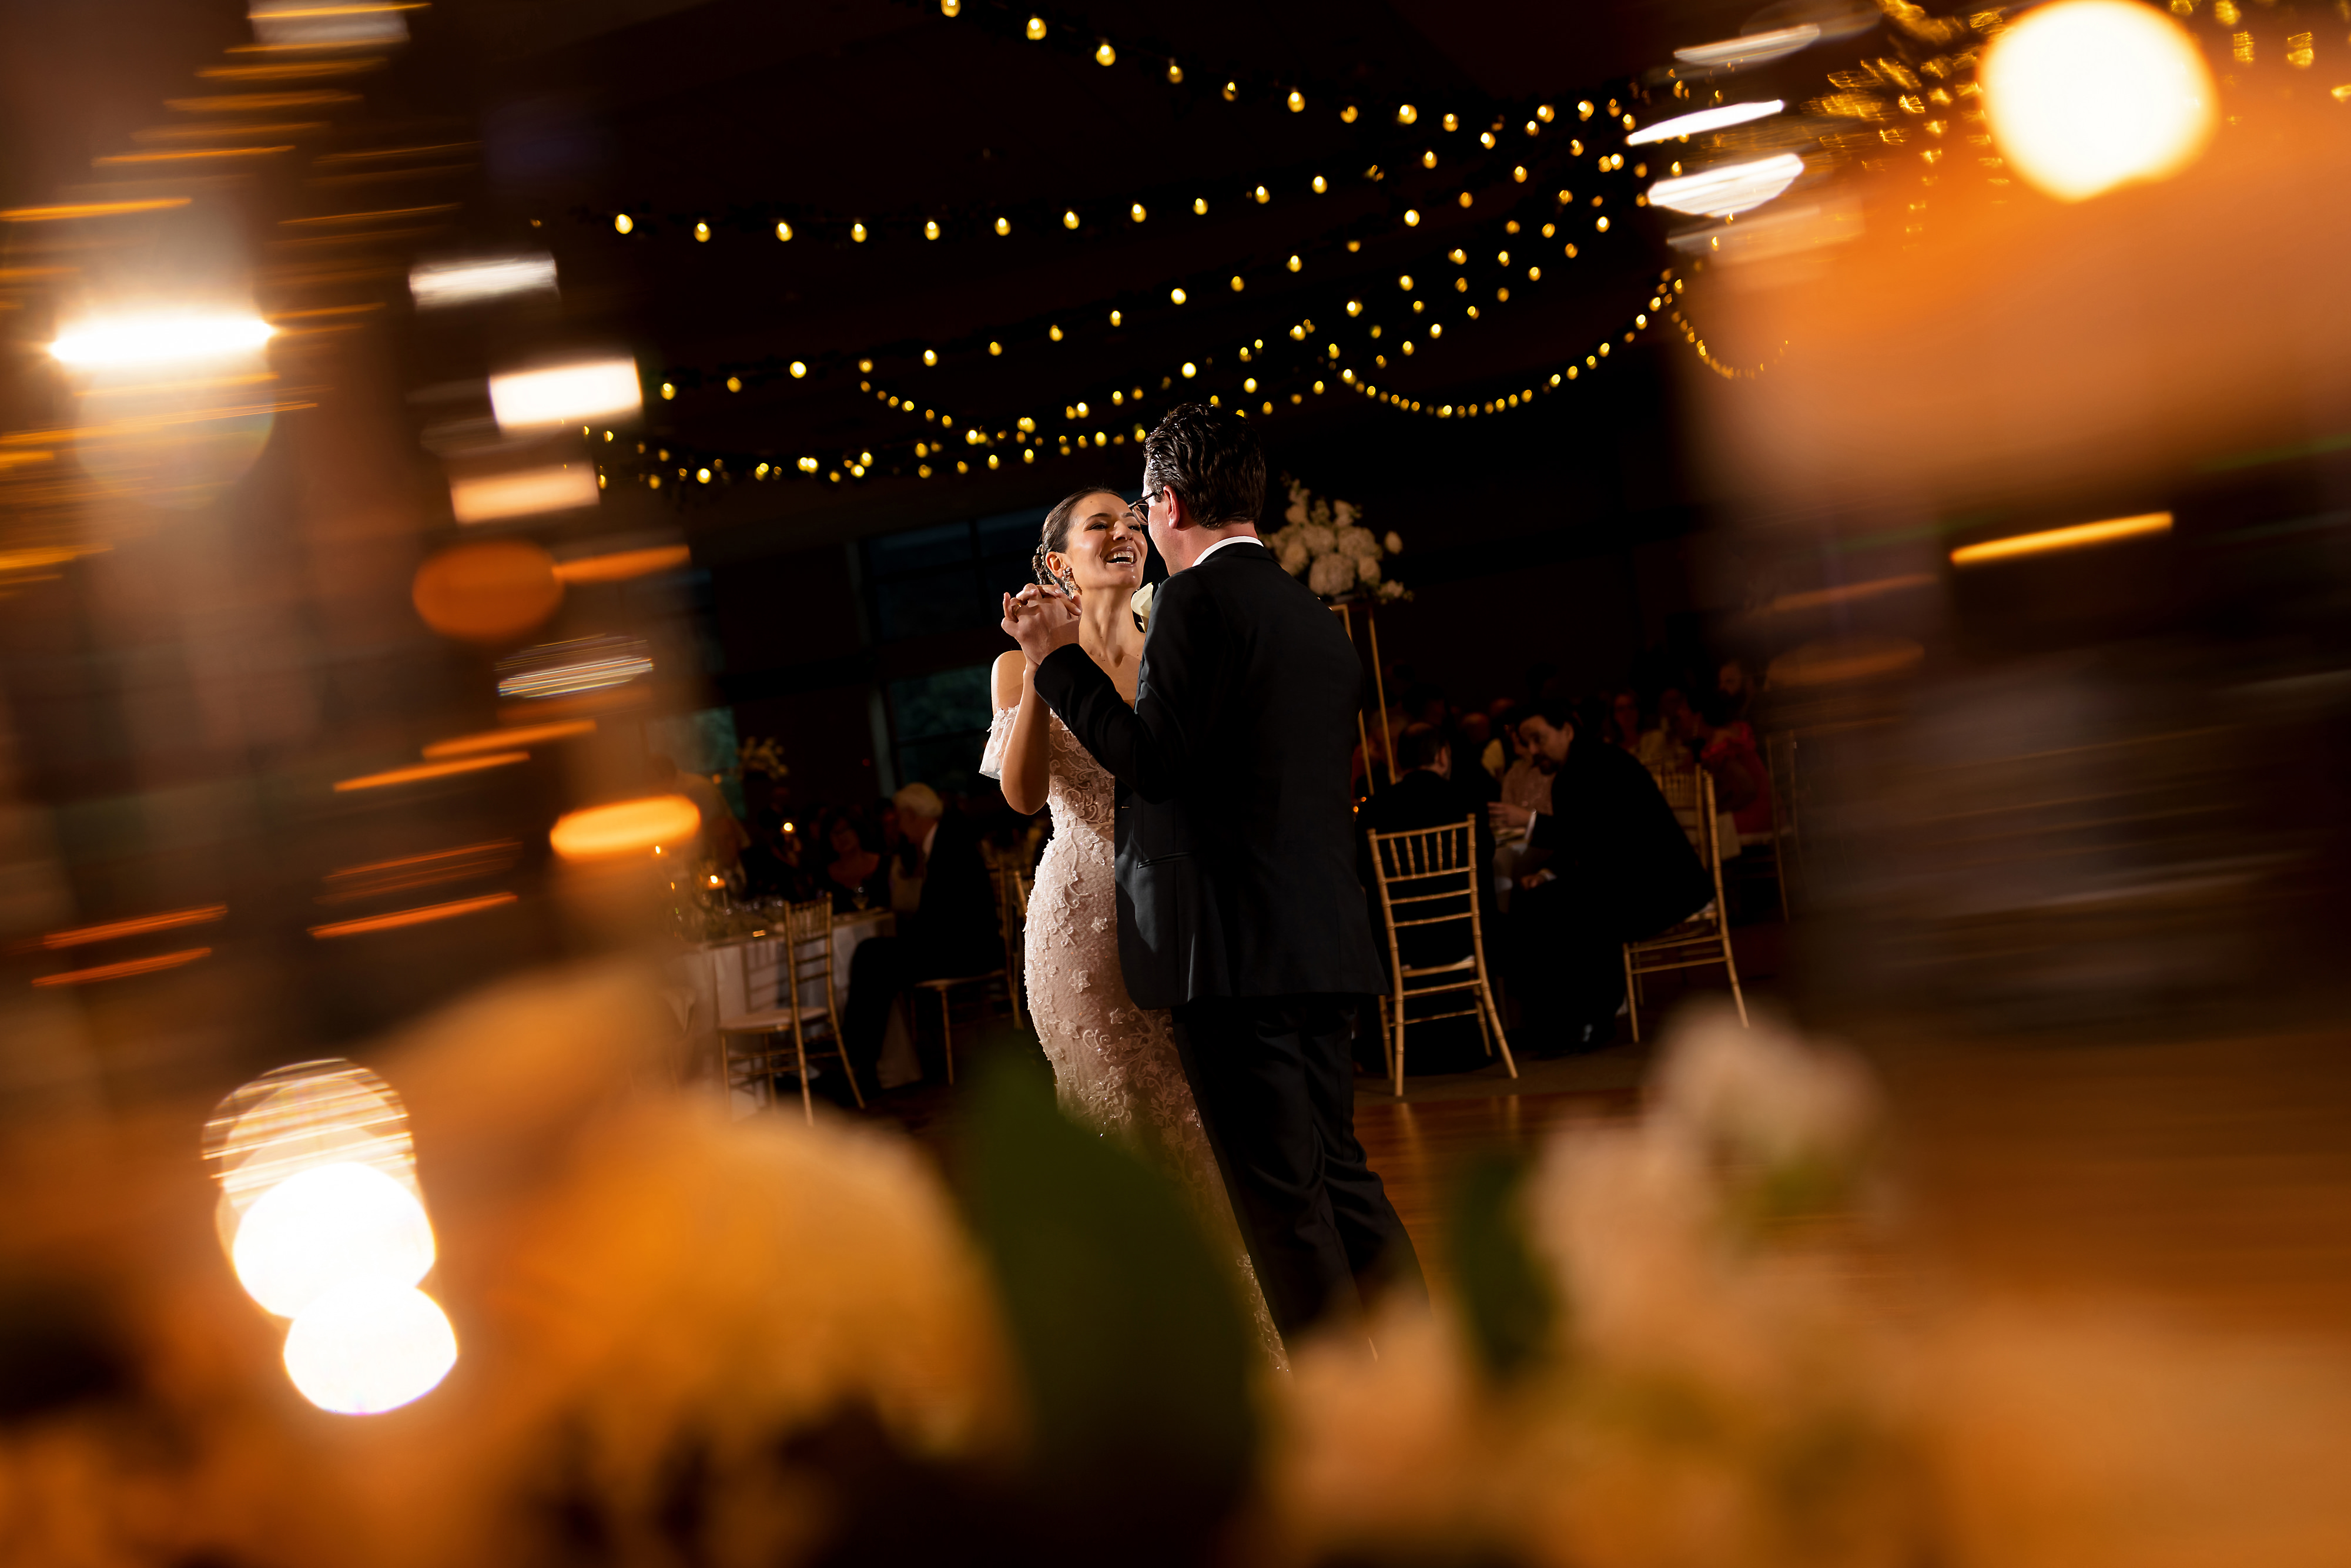 Bride and groom first dance with market lights during wedding reception at Halls of St. George in Schererville, Indiana